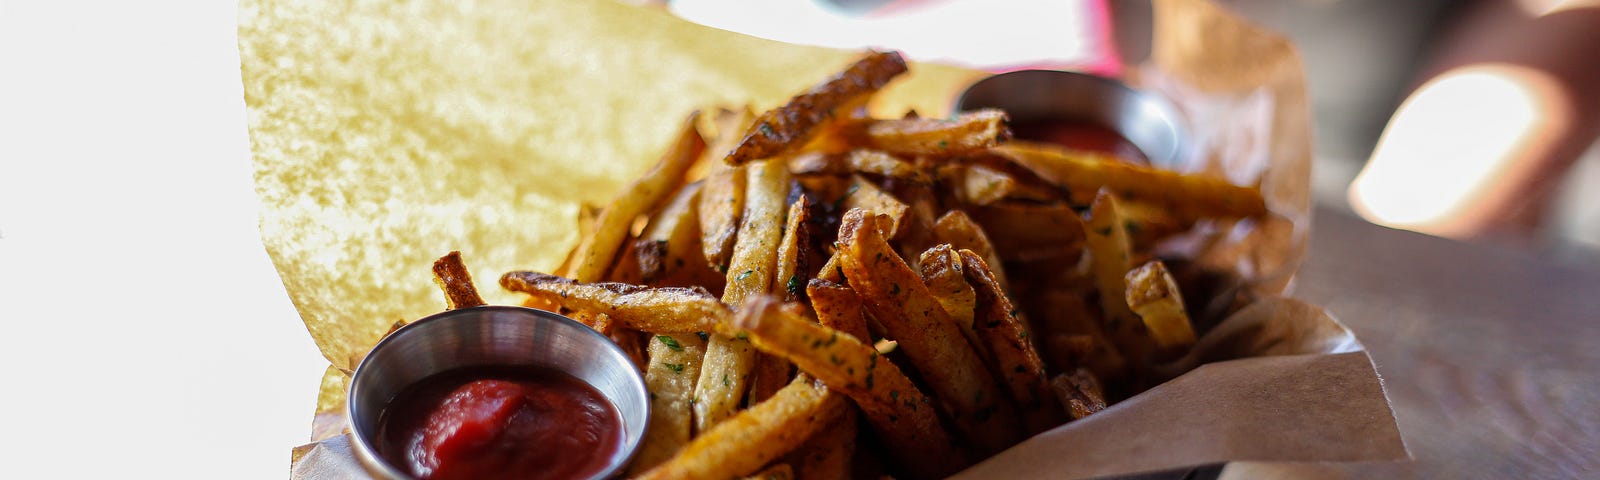 Crispy french fries in a metal basket lined with brown paper and a a small dish of ketchup.